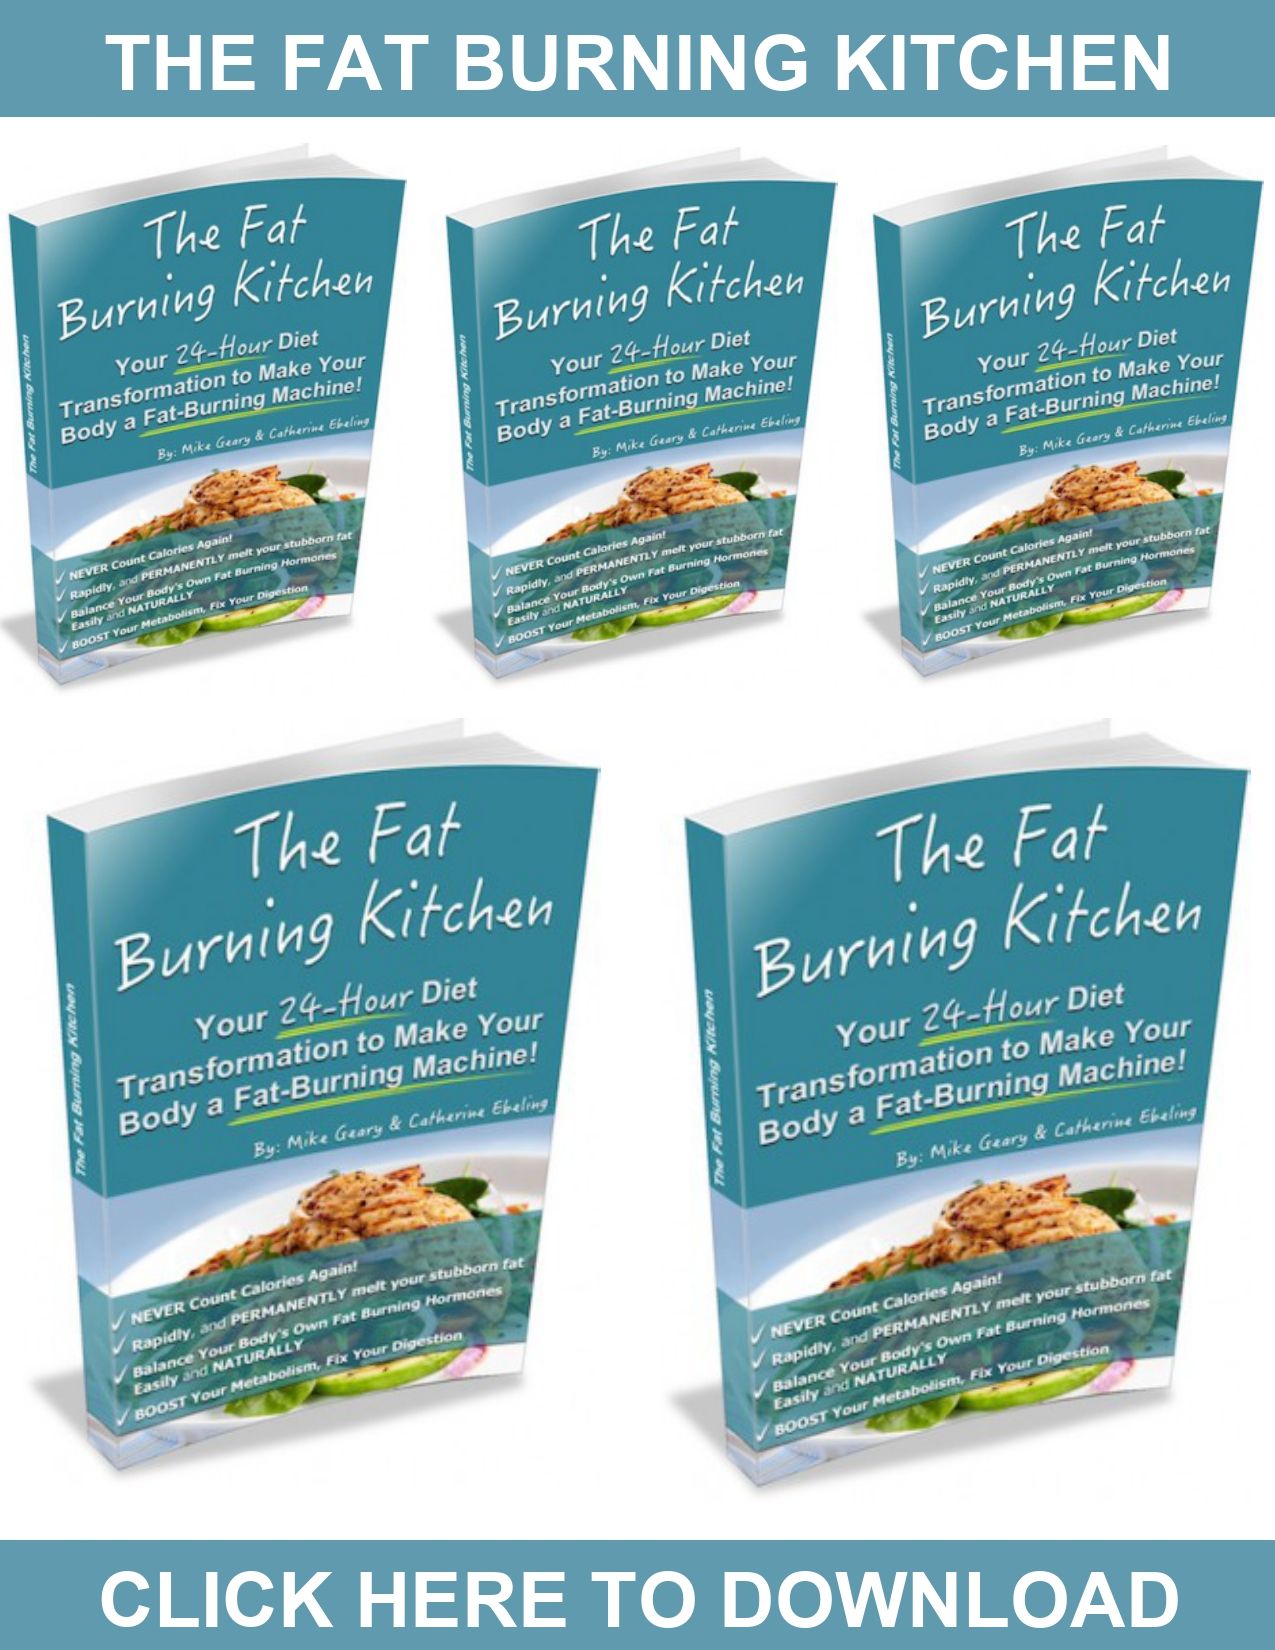 the fat burning kitchen book reviews